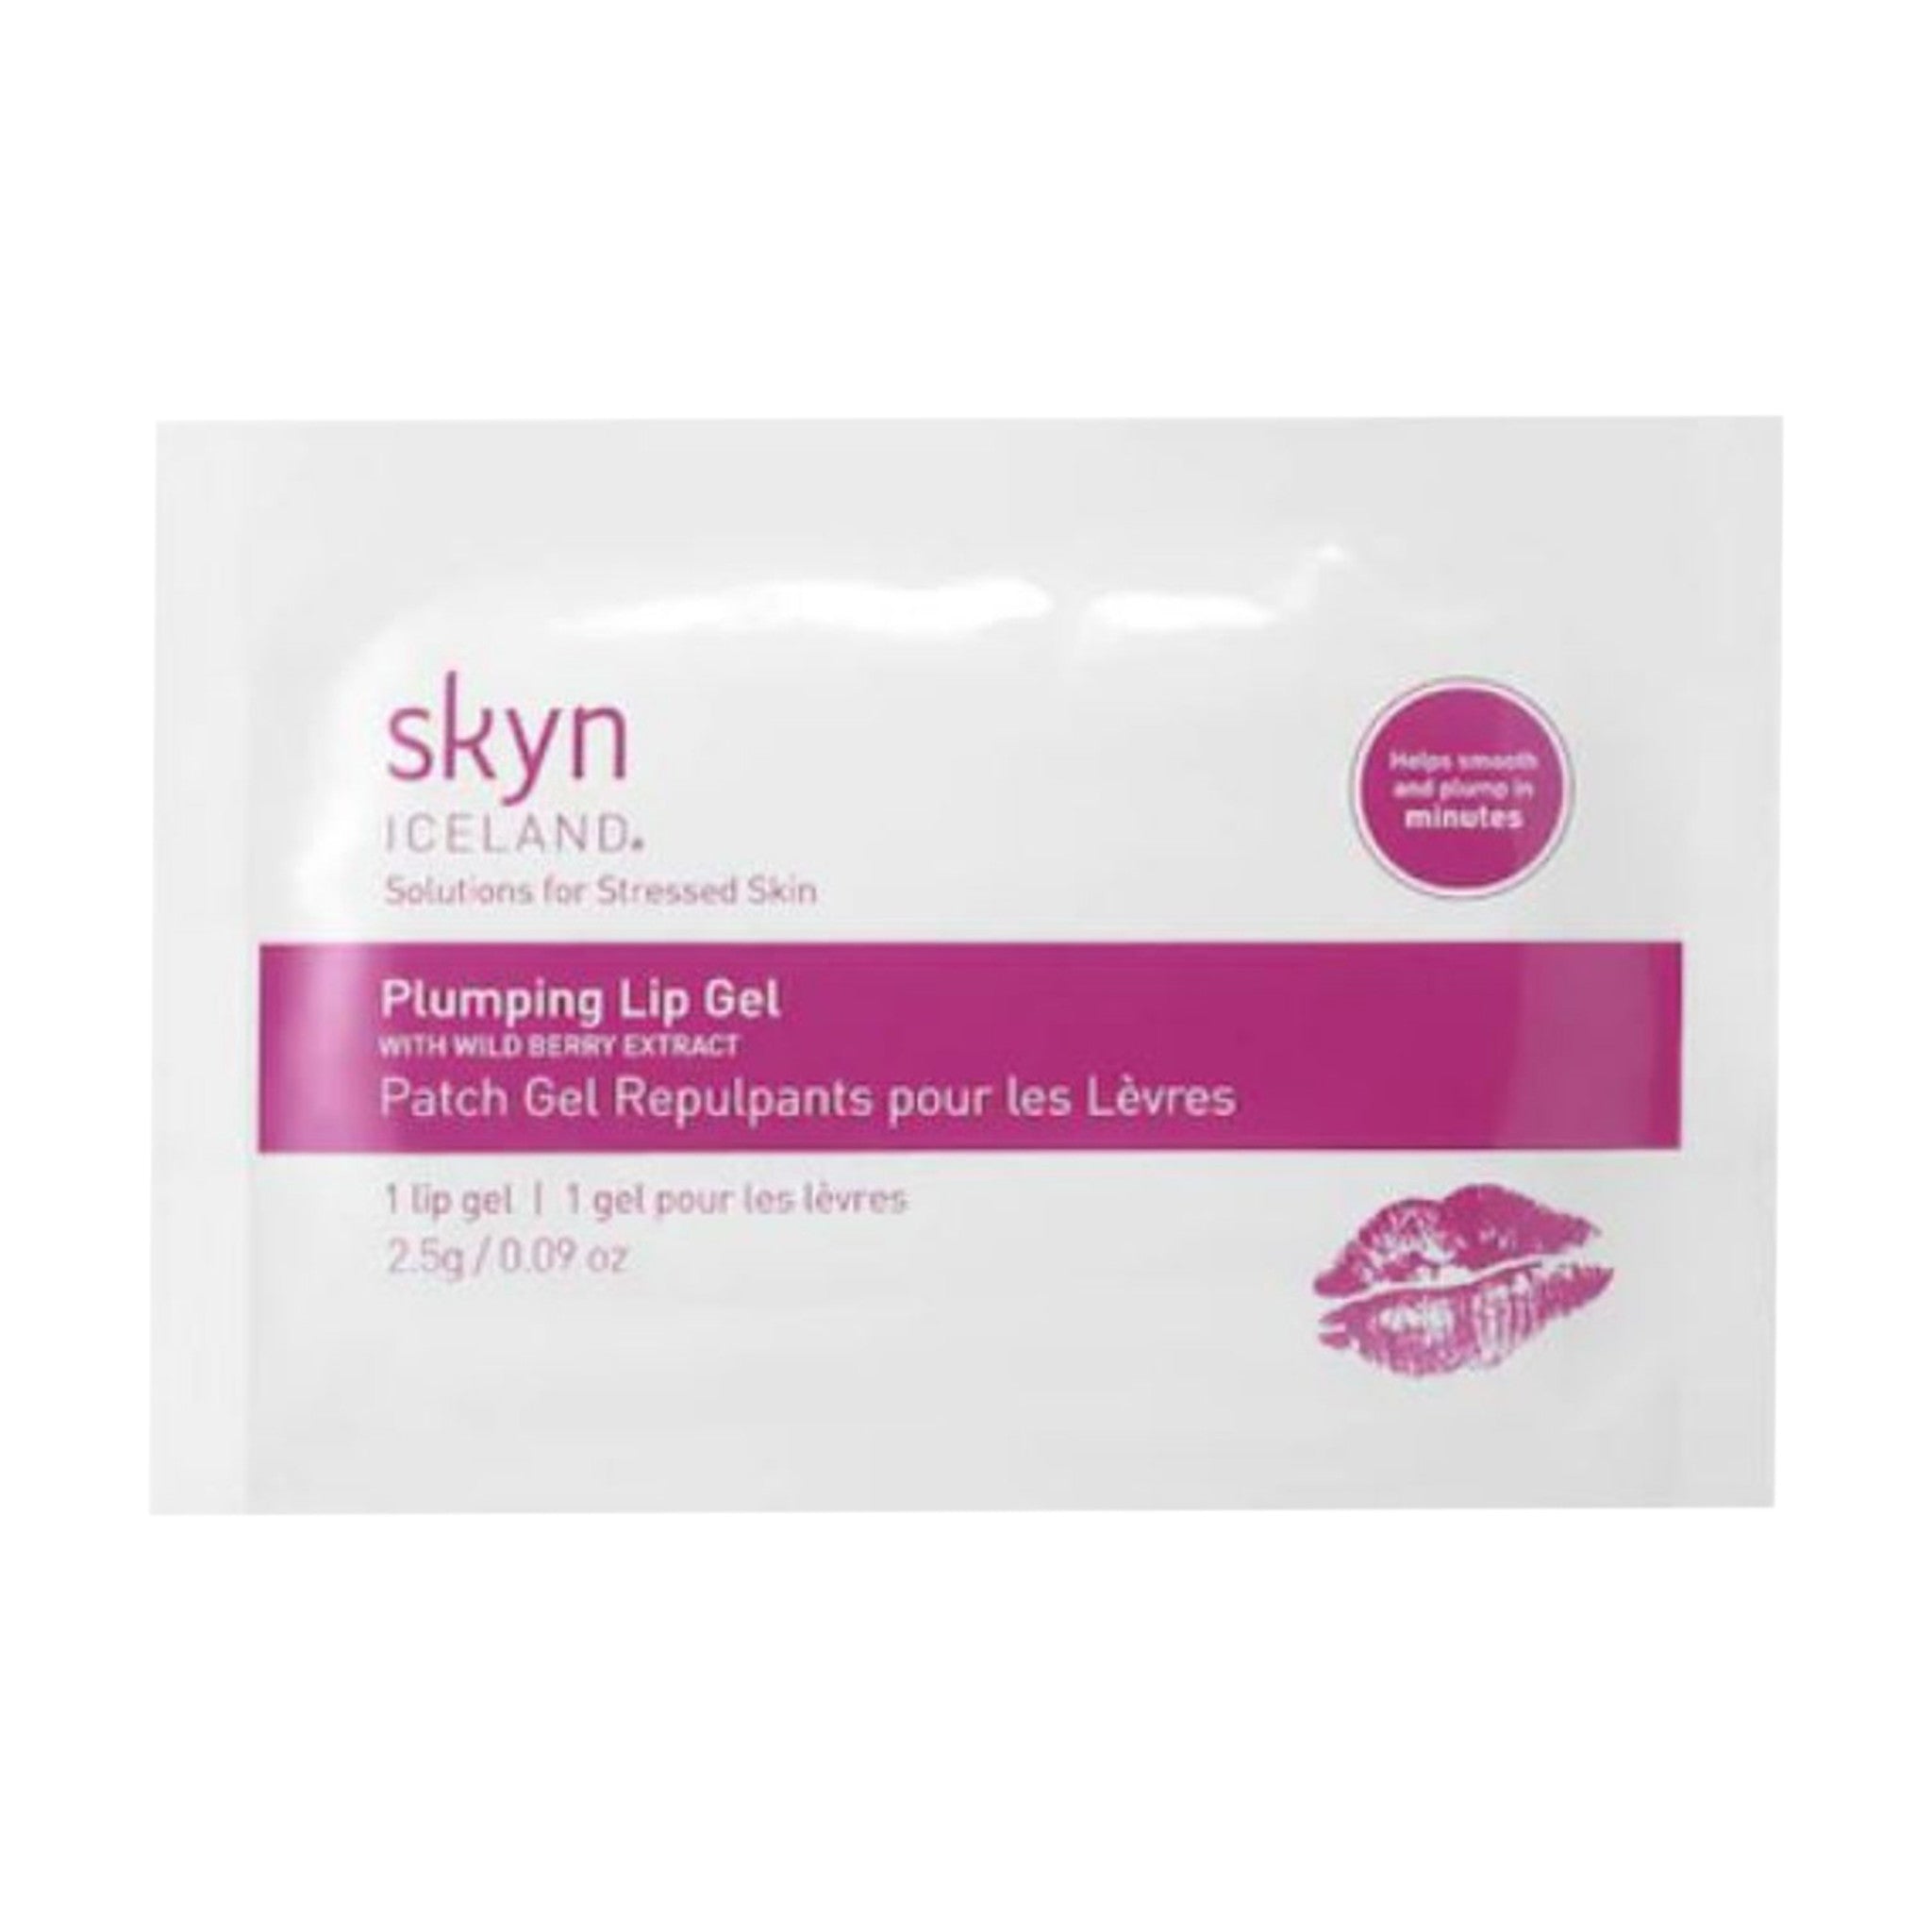 Skyn Iceland Plumping Lip Gels Size variant: 1 Treatment main image.